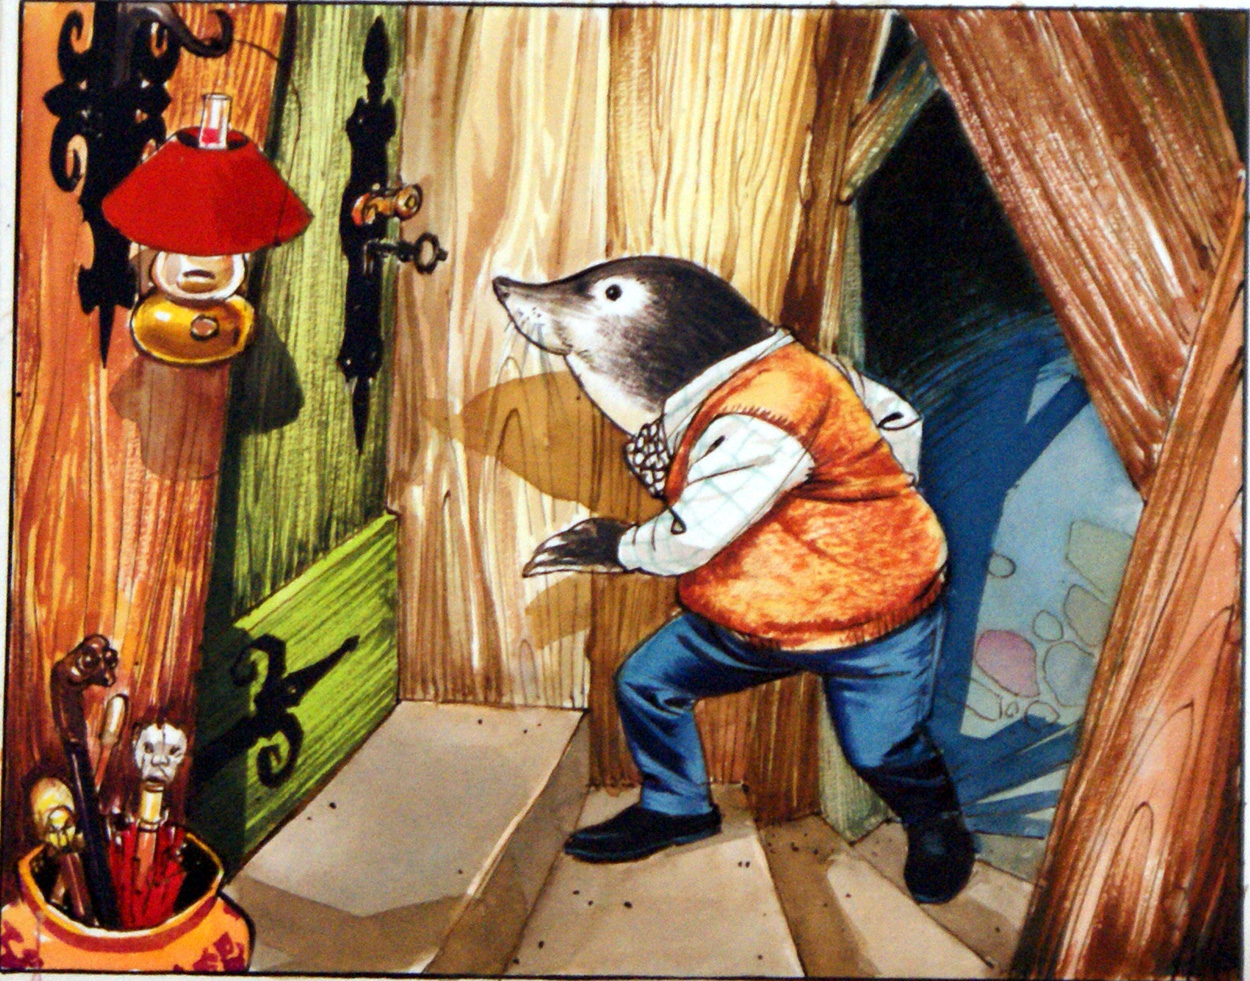 Mole Answers his Front Door (Original) art by Wind in the Willows (Nadir Quinto) at The Illustration Art Gallery